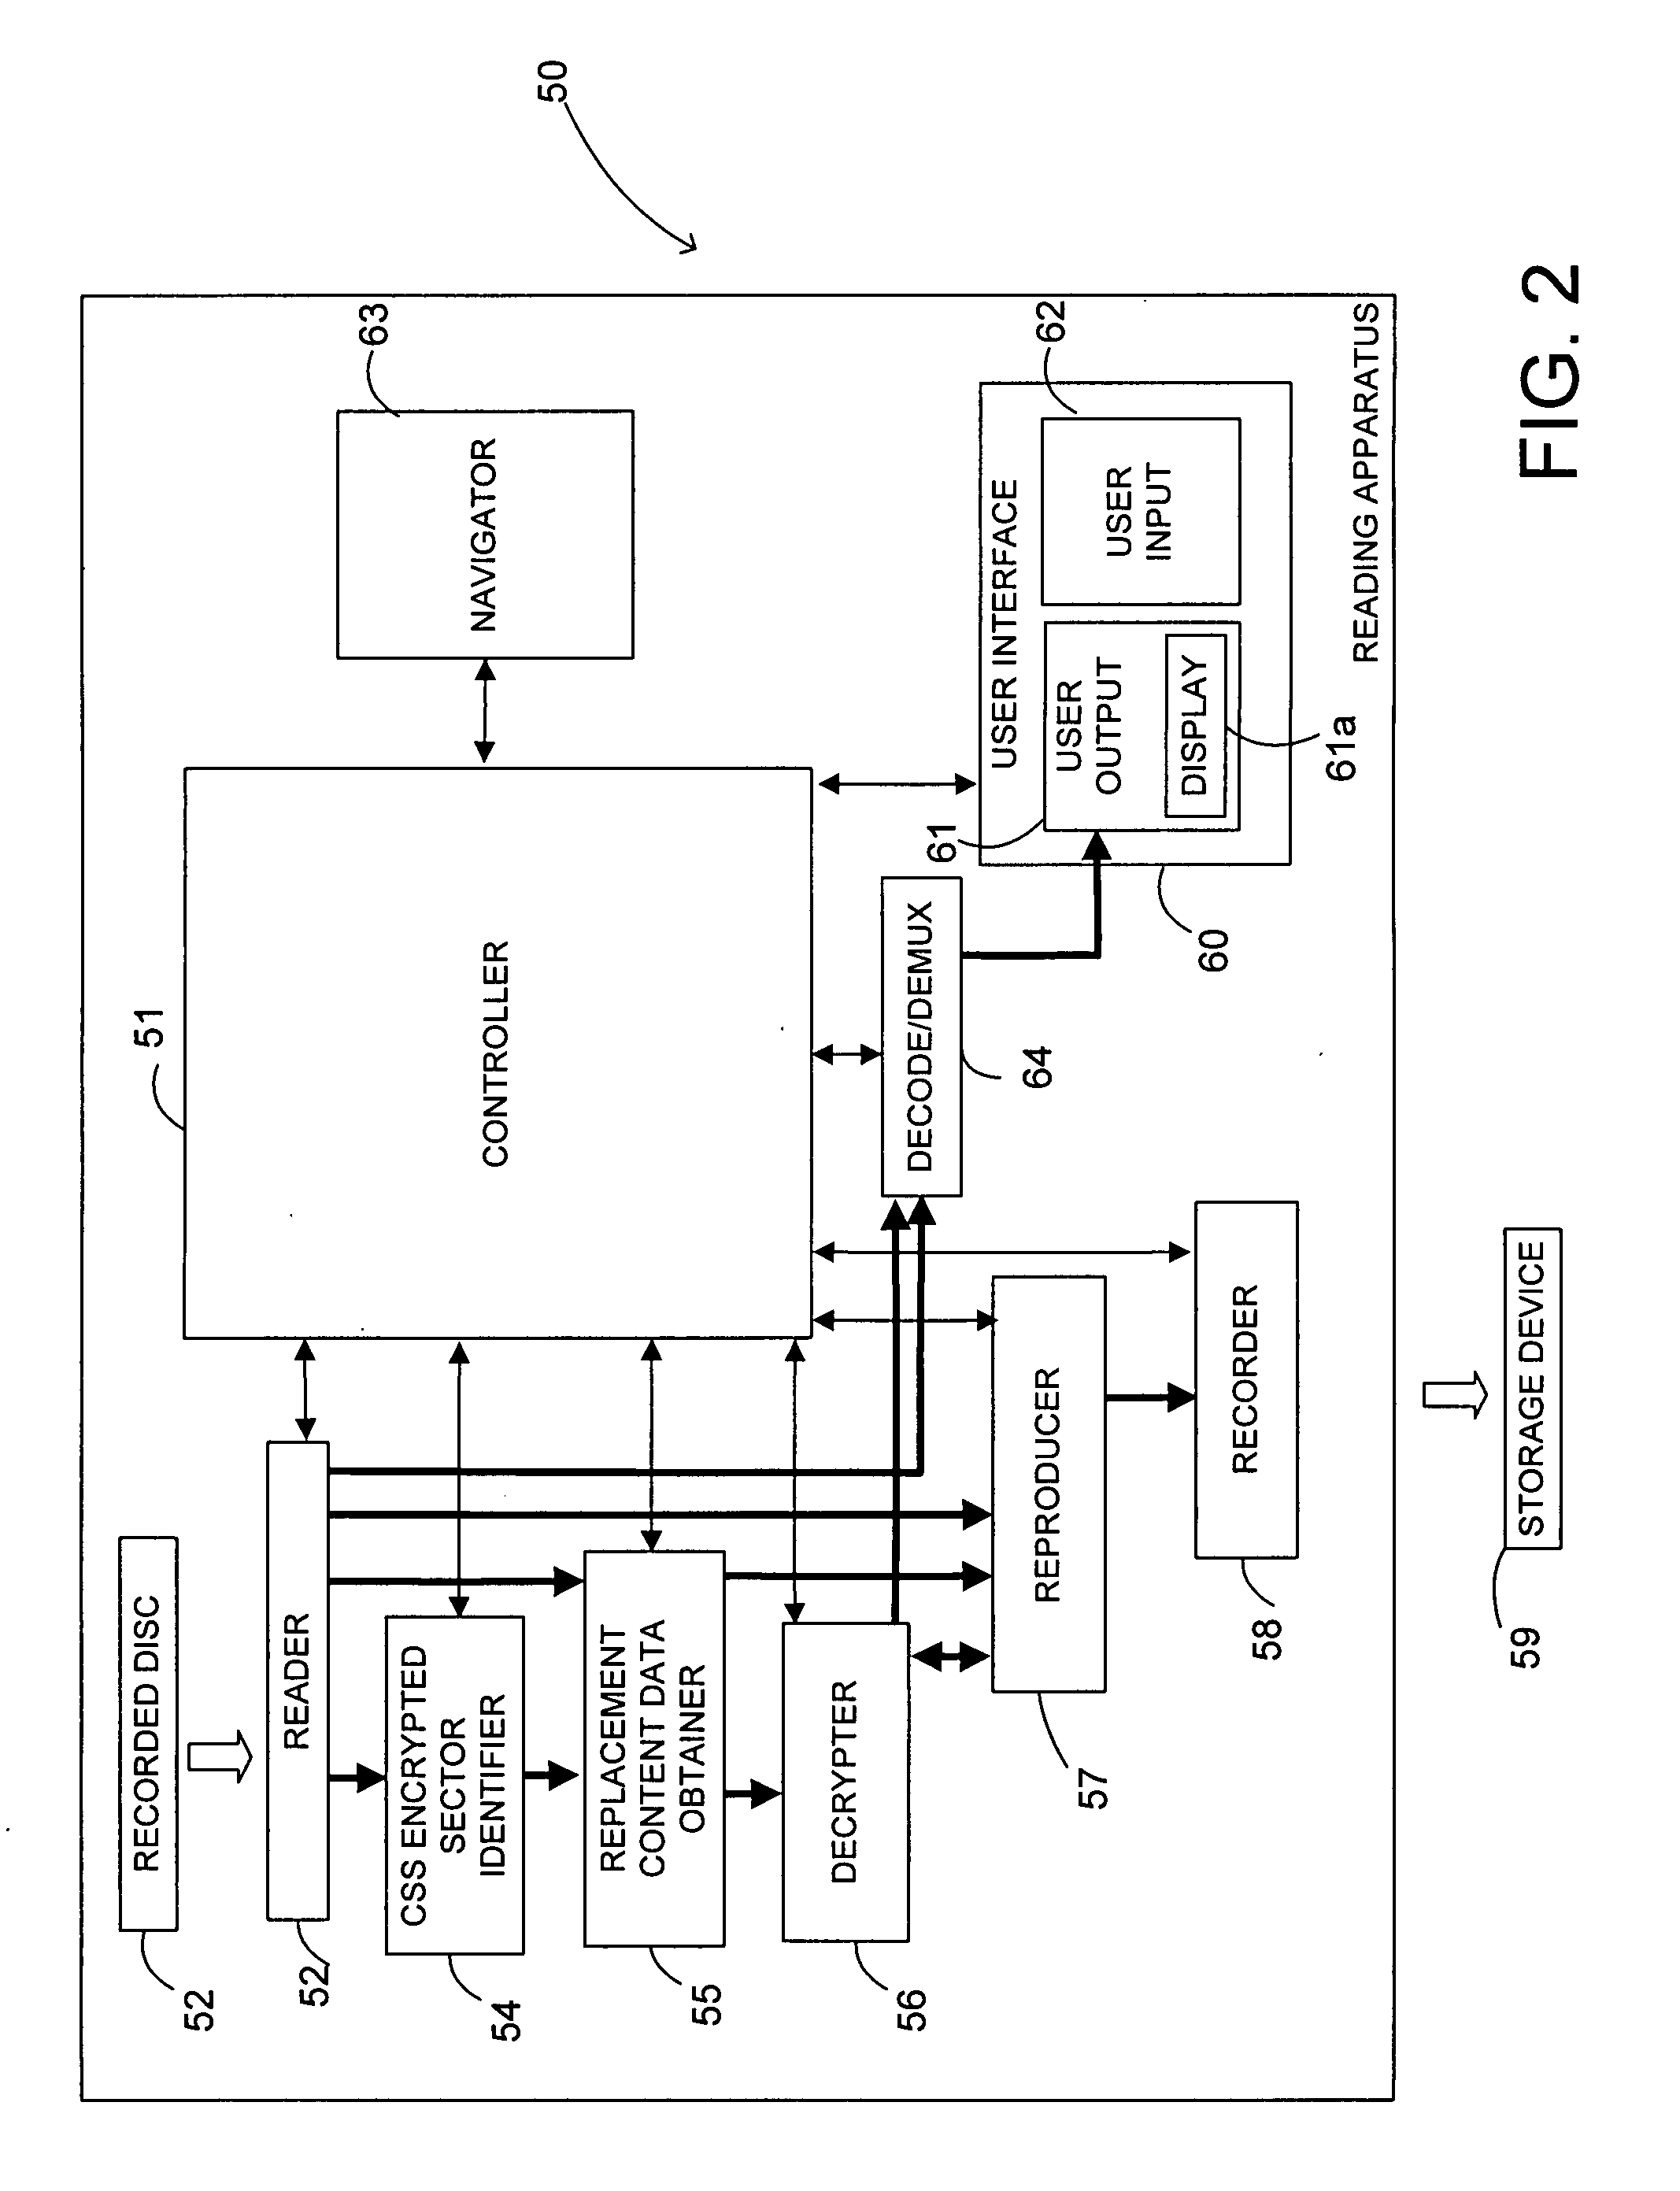 Apparatus for and a method of providing content data